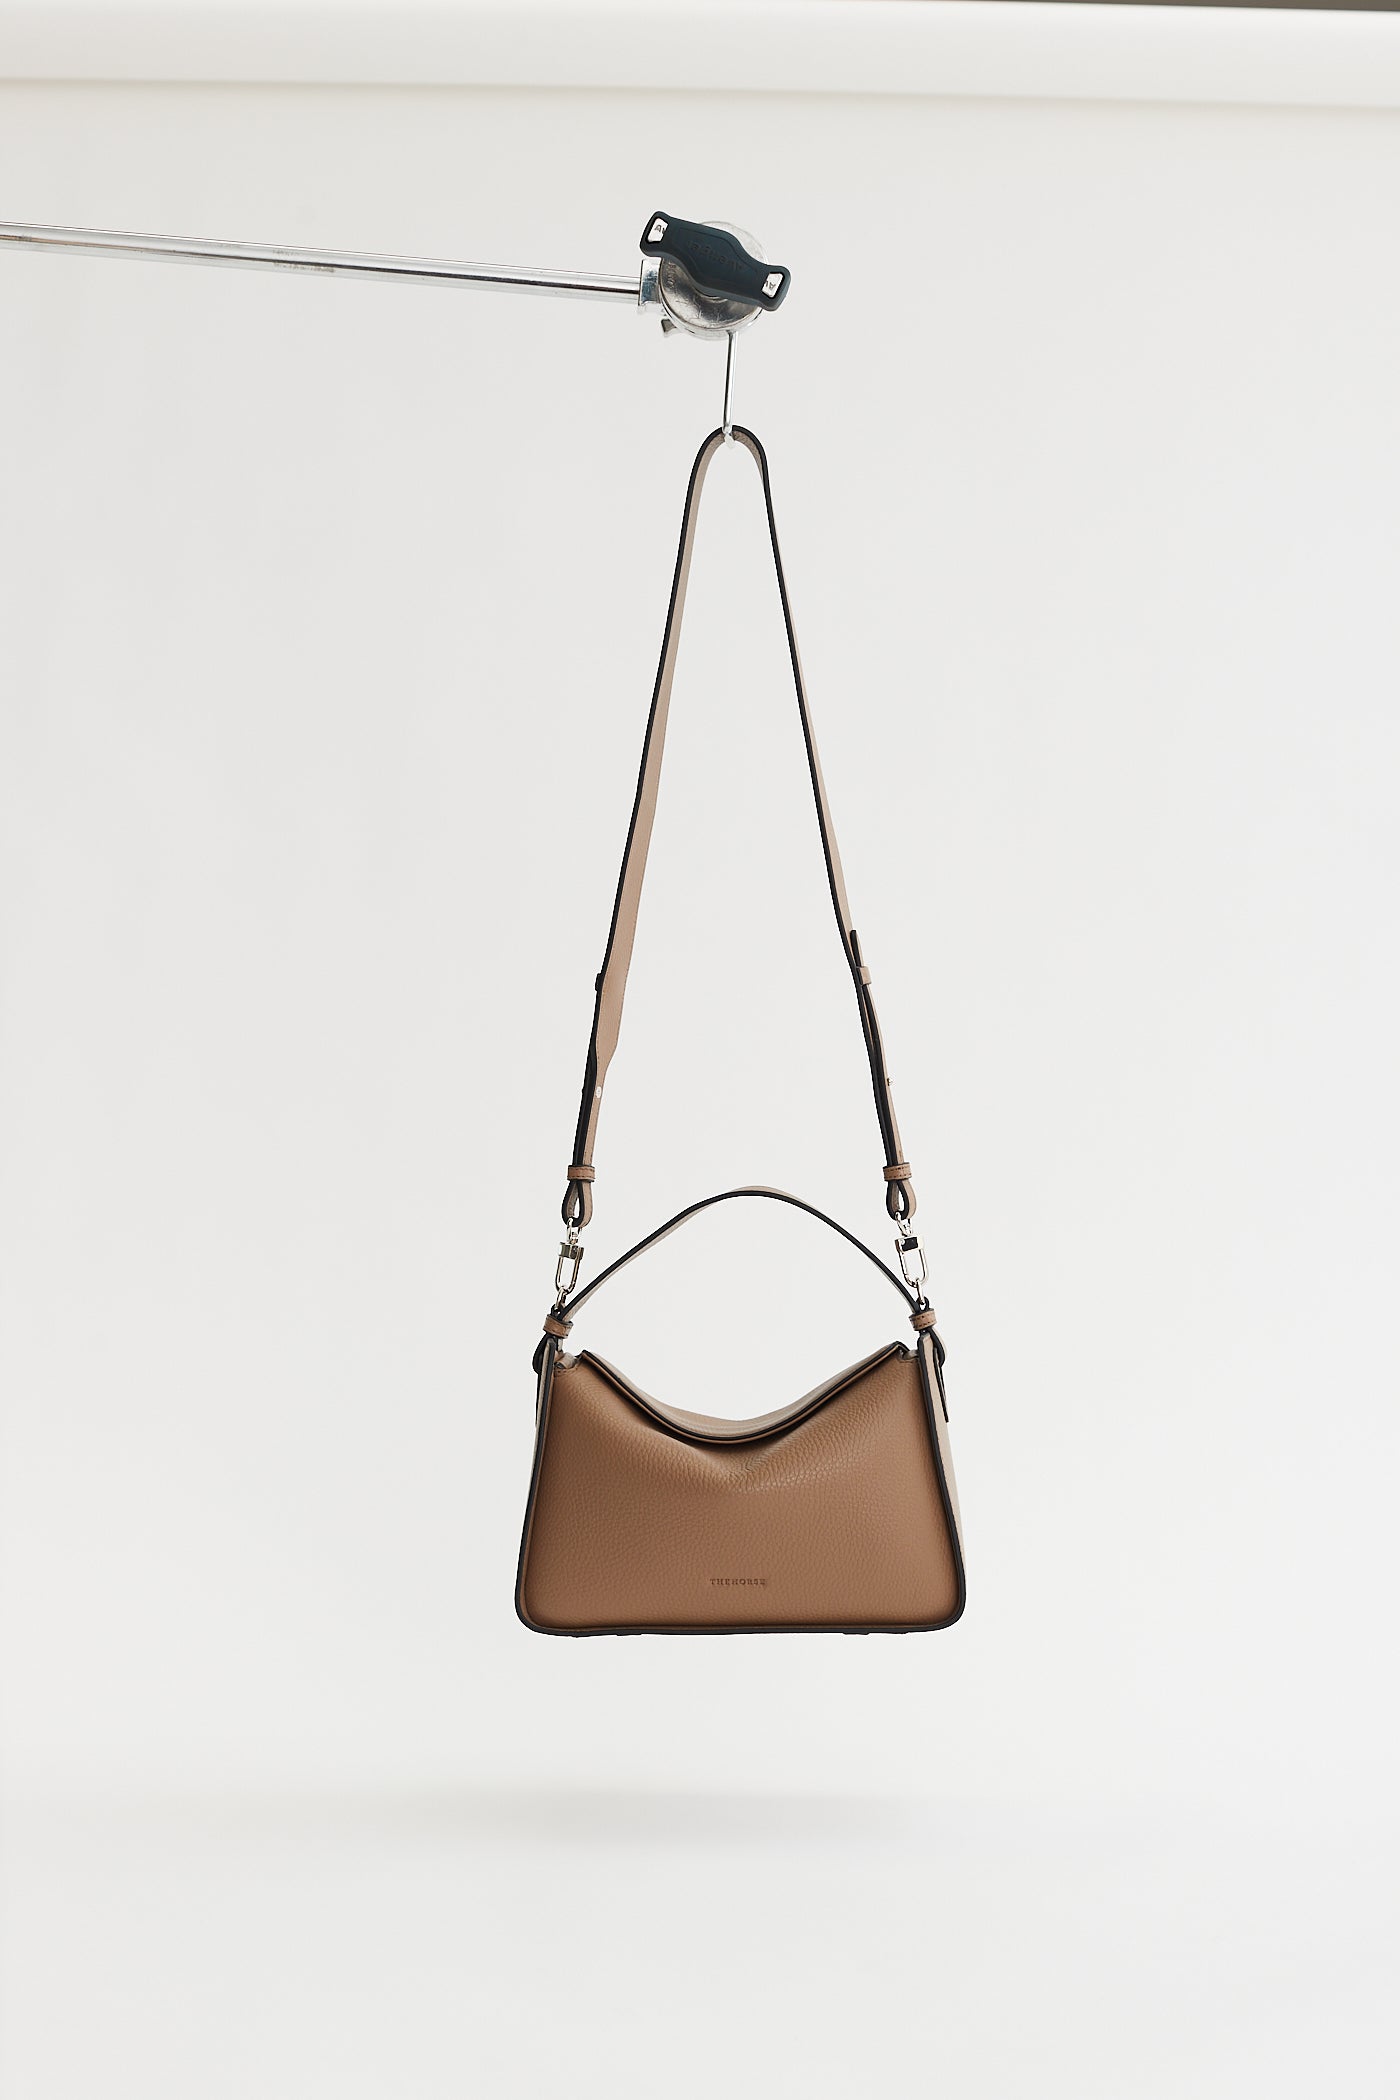 Clementine Bag: Taupe